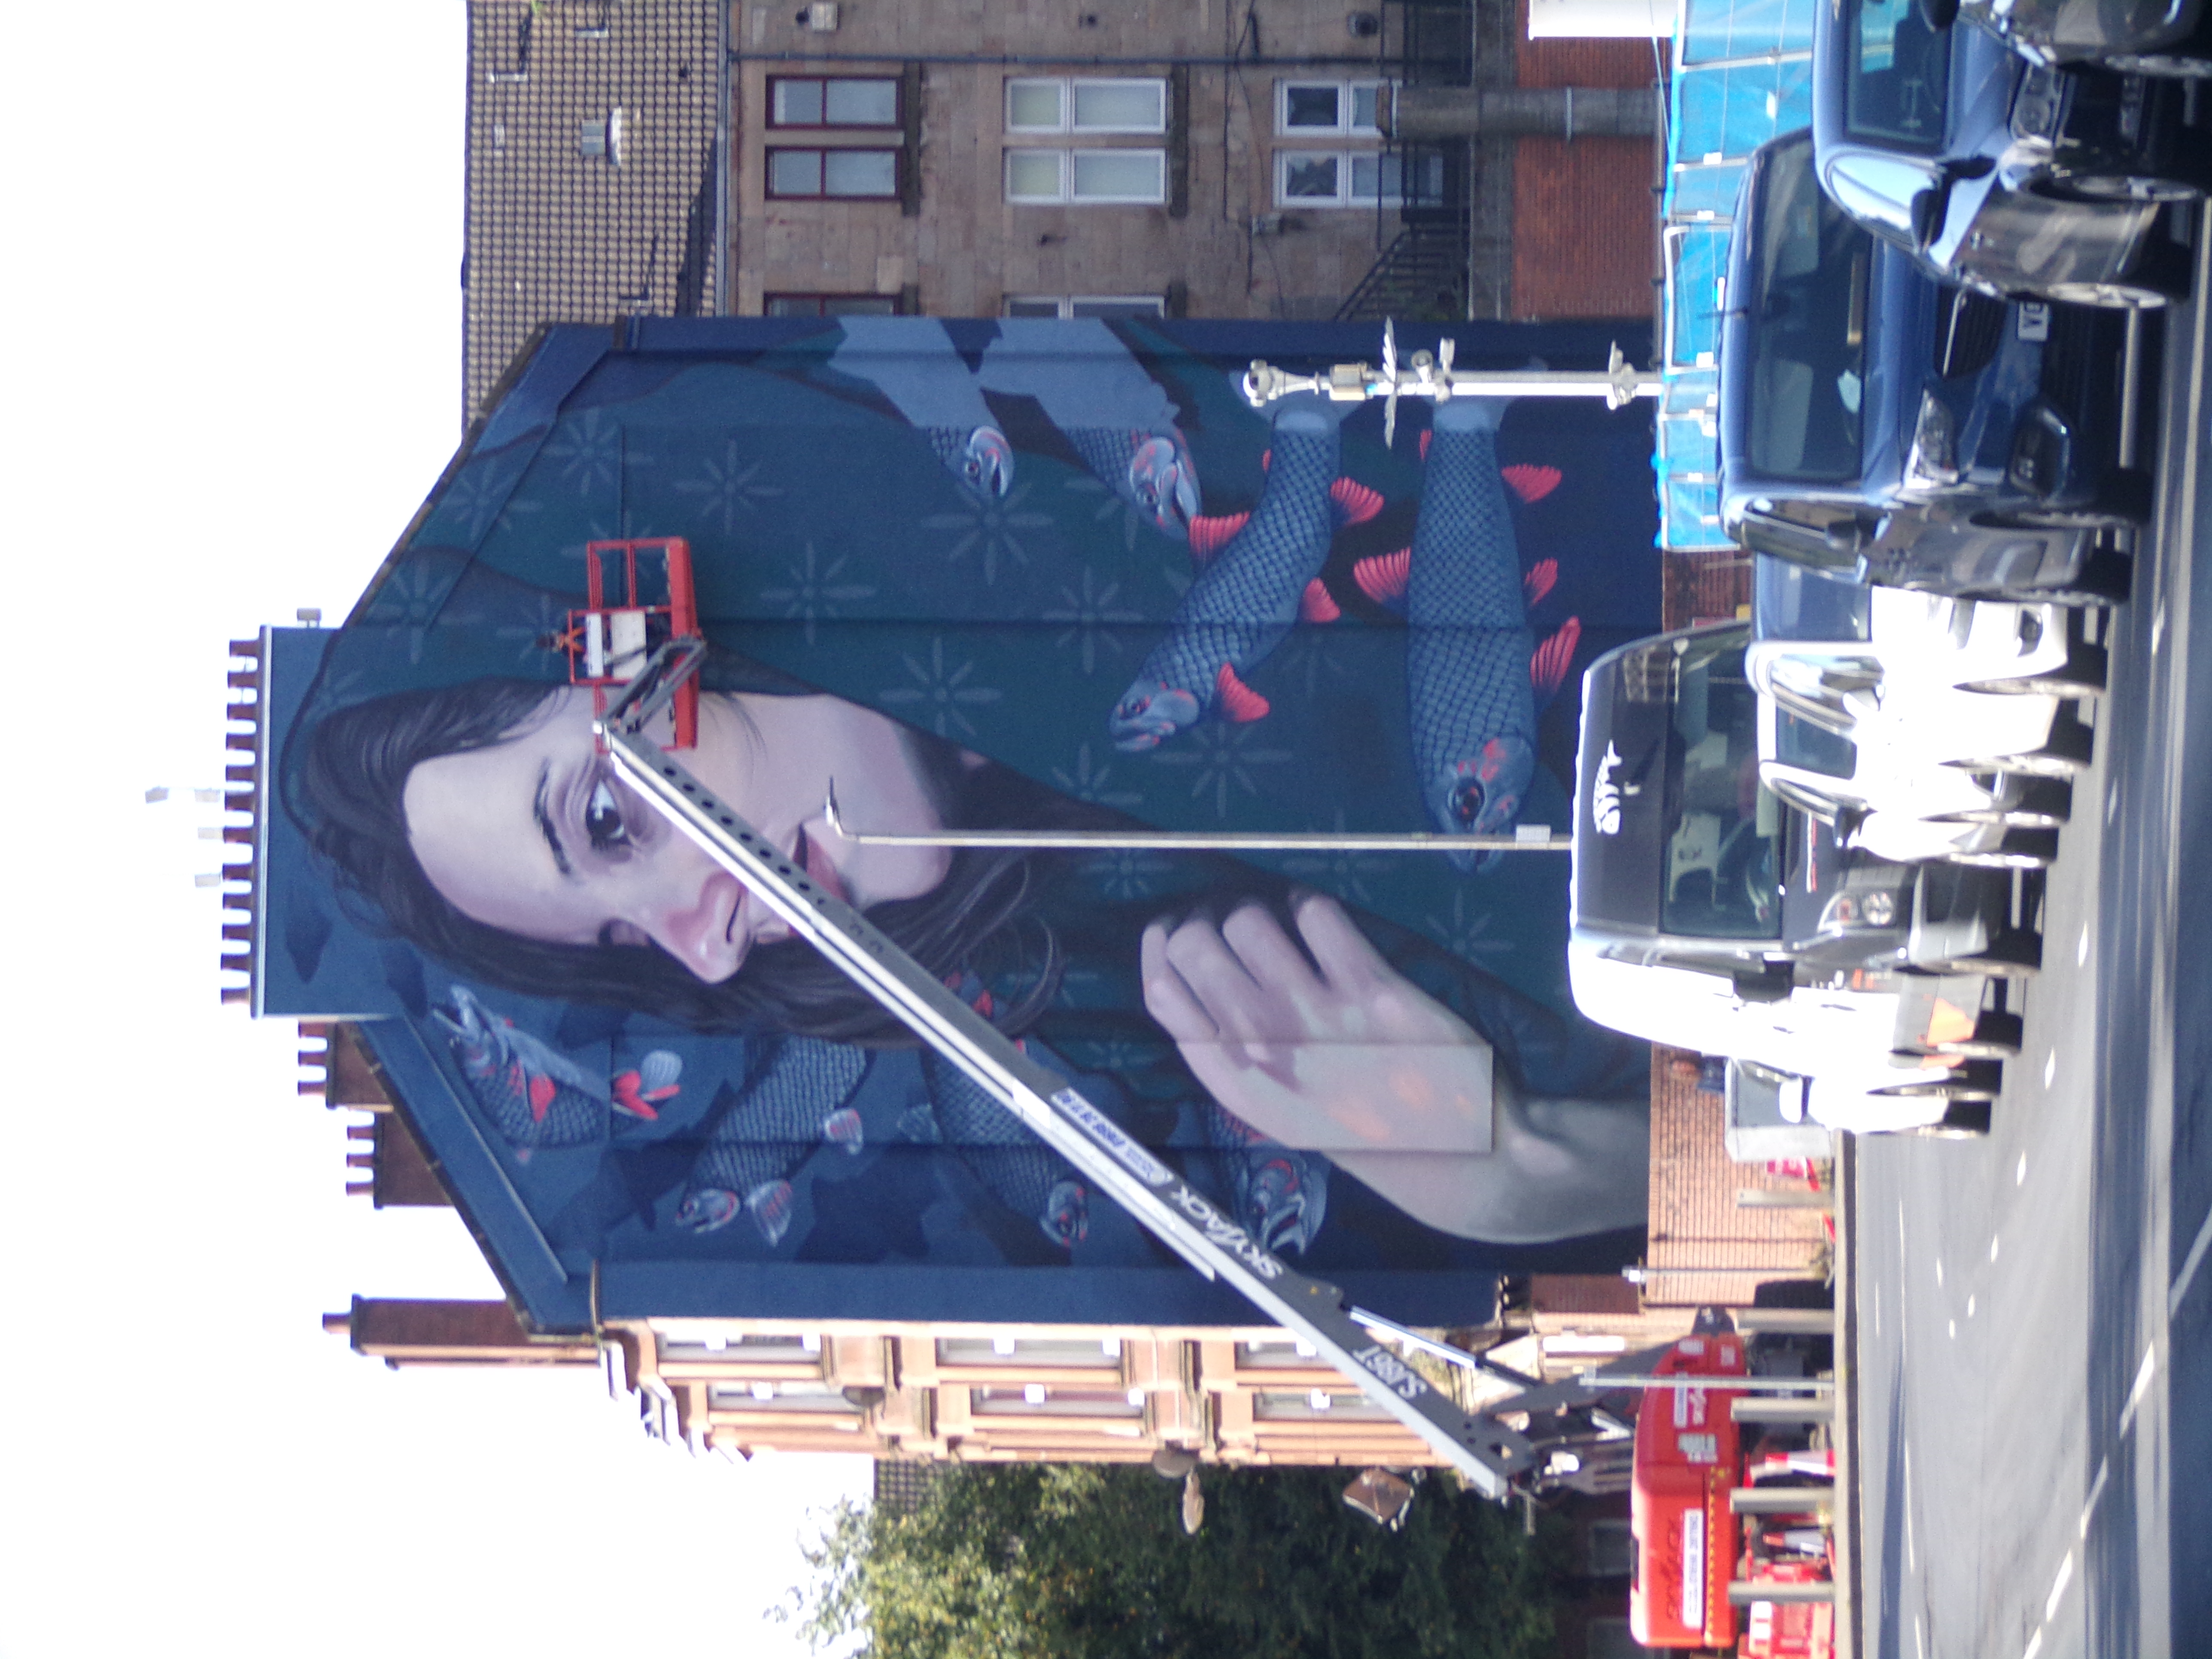 Thenue Housing mural takes shape in Glasgow's East End